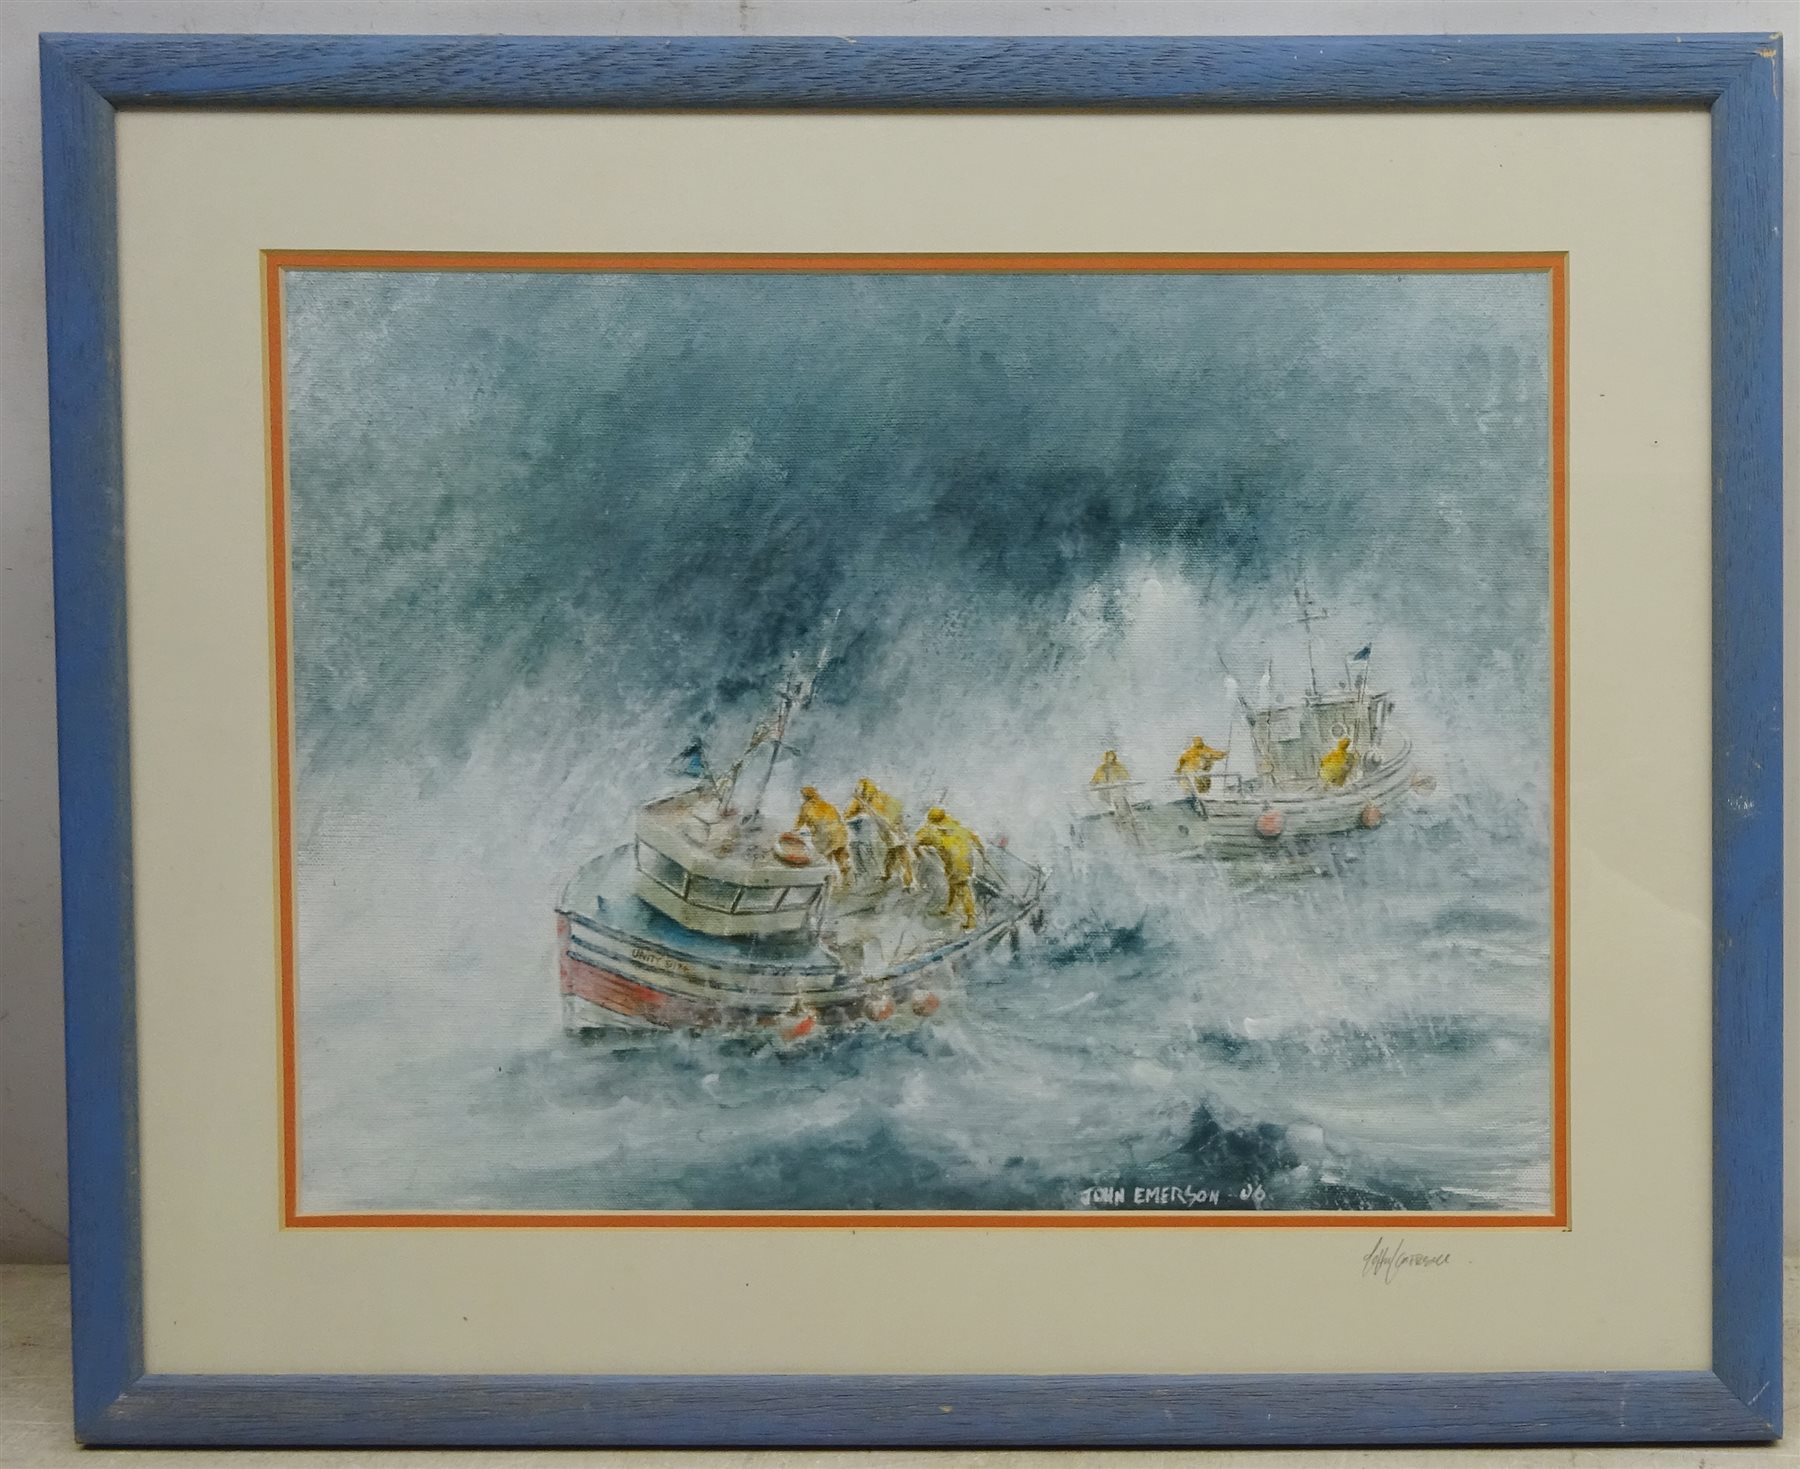 John Emerson (British Contemporary): Scarborough Trawler 'Unity' in a Heavy Swell, - Image 2 of 2